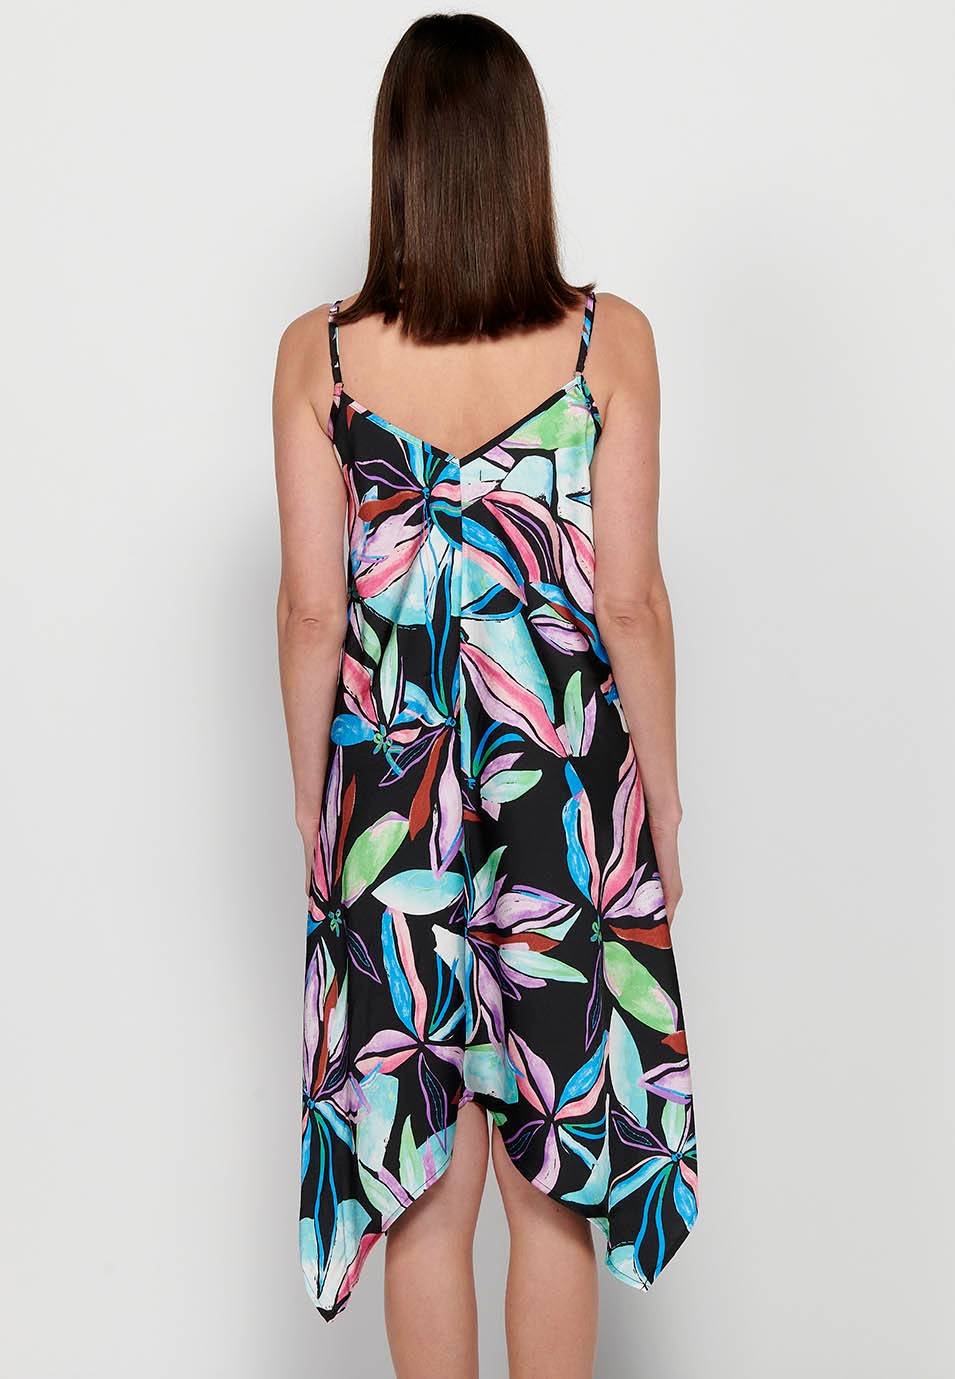 Midi dress with adjustable straps with sparkling neckline and long peaked finish with Multicolor floral print for Women 2